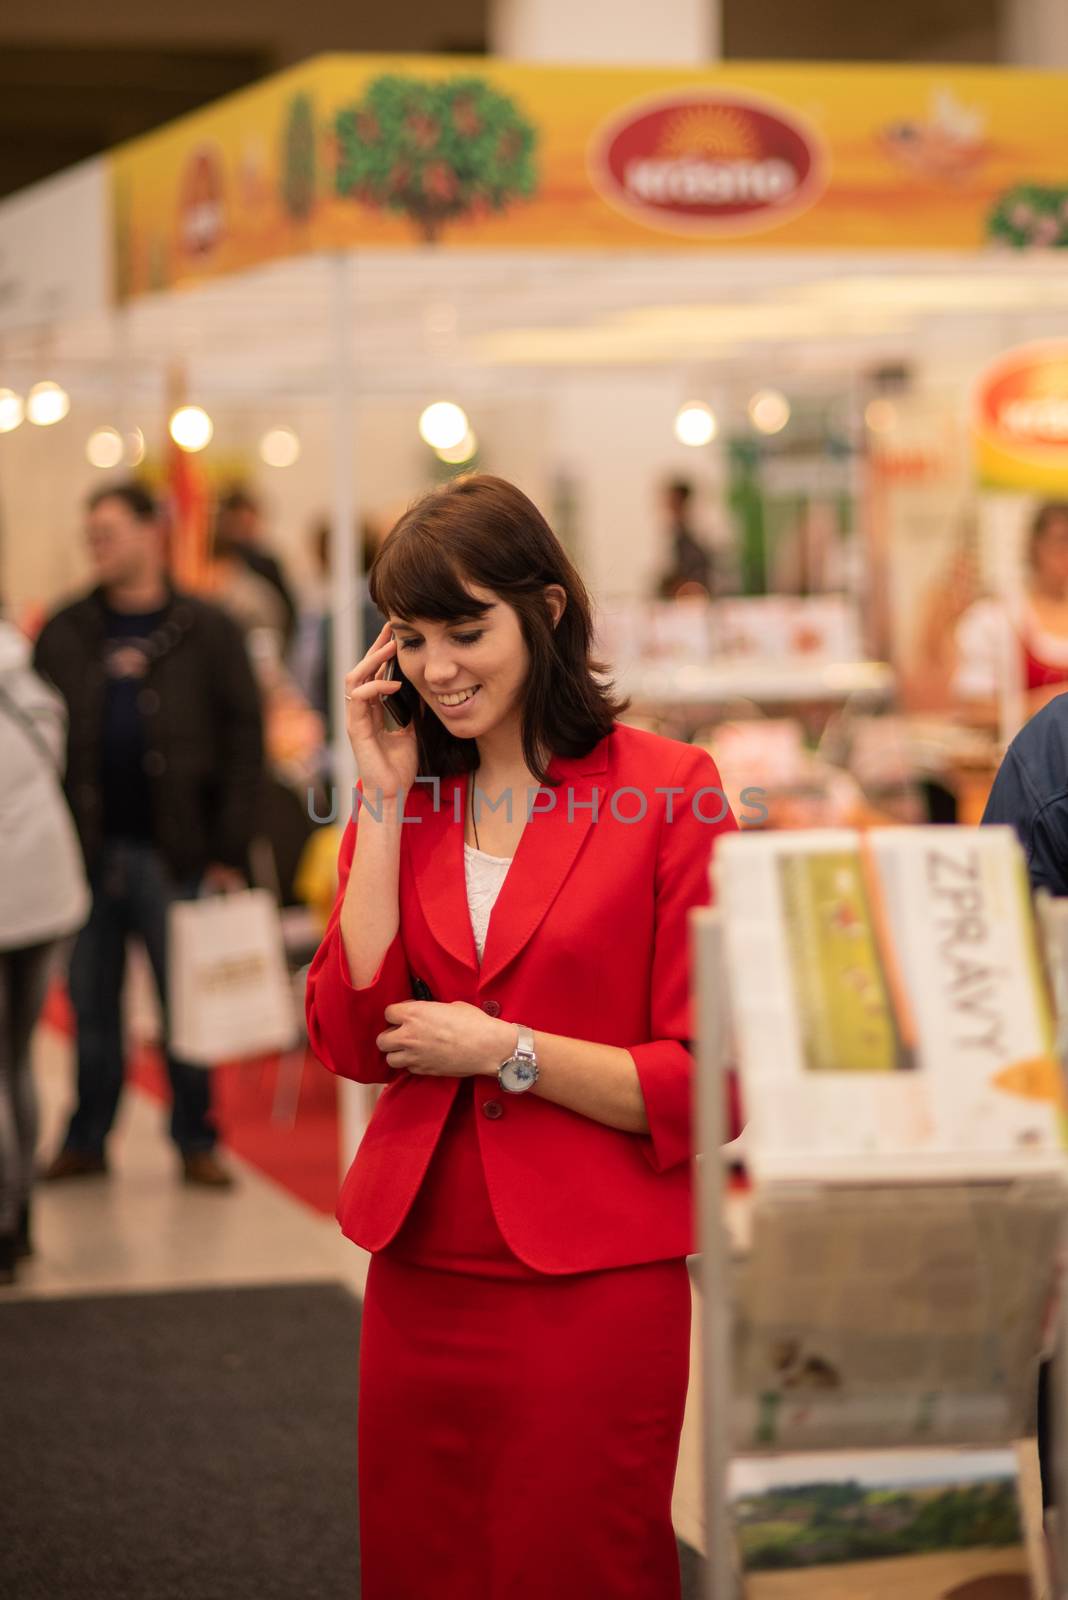 03/04/2017. Brno, Czech Republic. Woman speaking on her phone attending an event at the convention trade center in Brno. BVV Brno Exhibition center. Czech Republic by gonzalobell